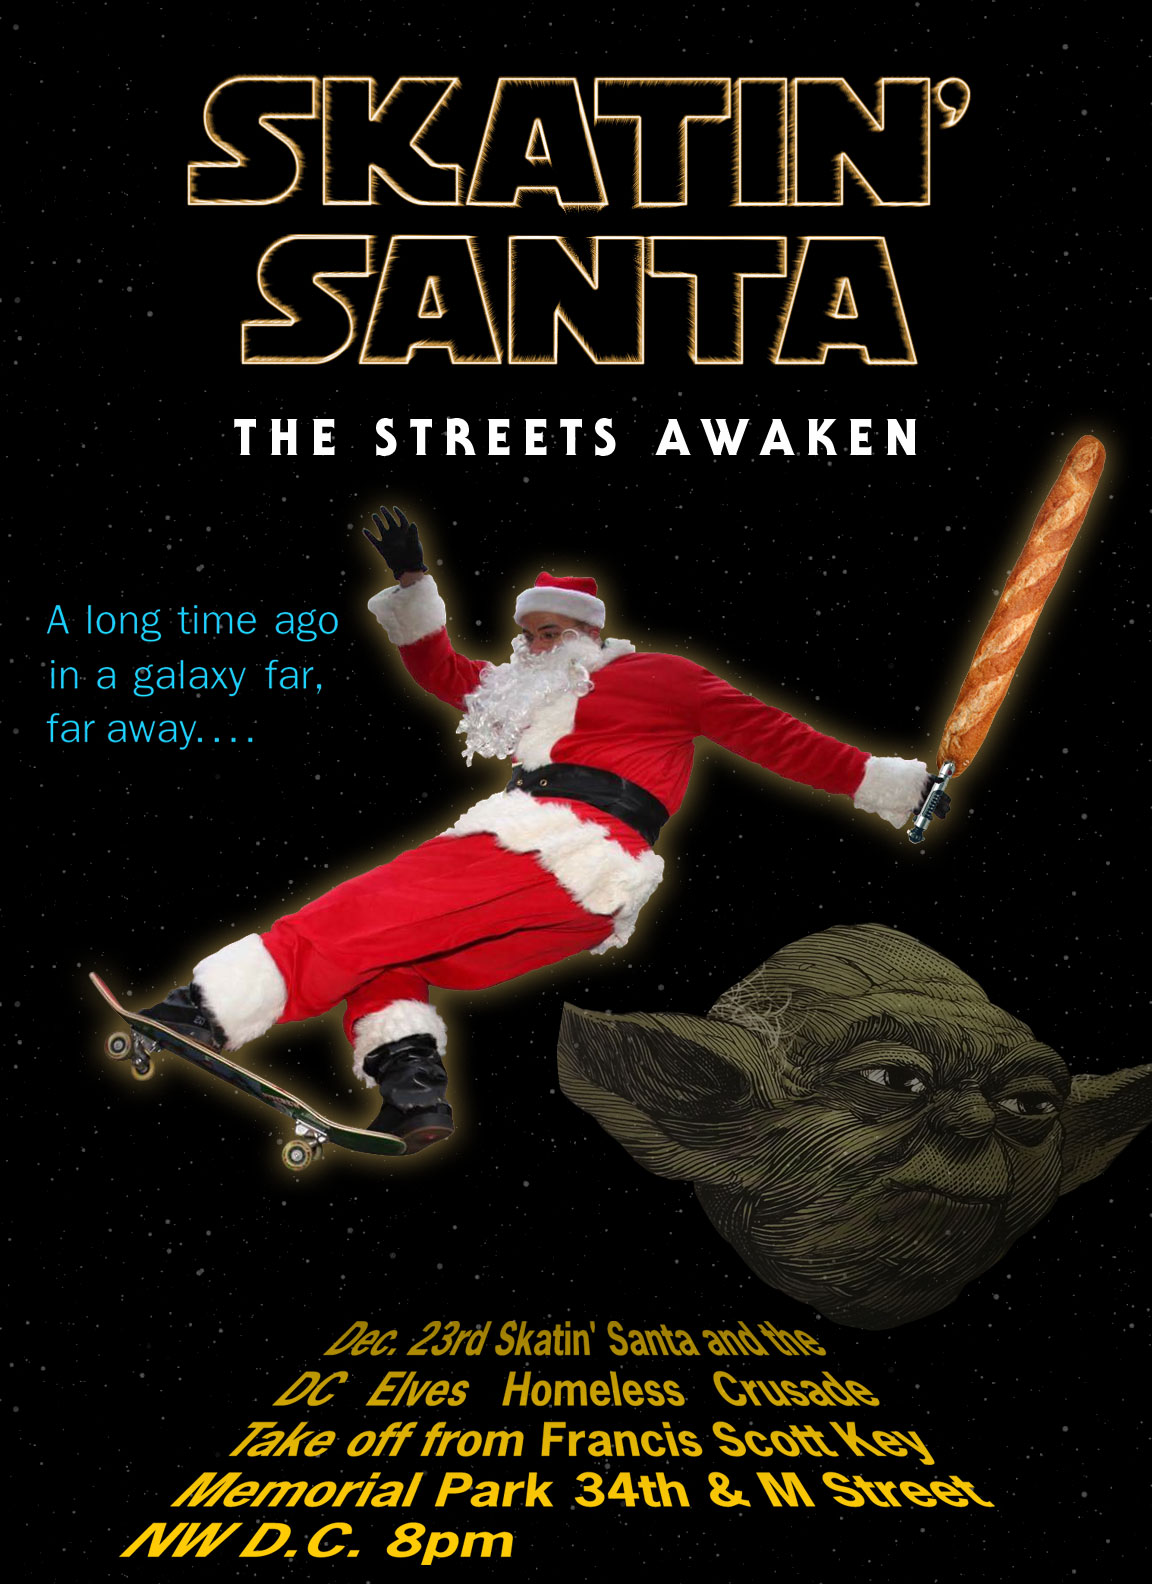 Skatin' Santa flyer publicizing crusade to help homeless people in D.C.